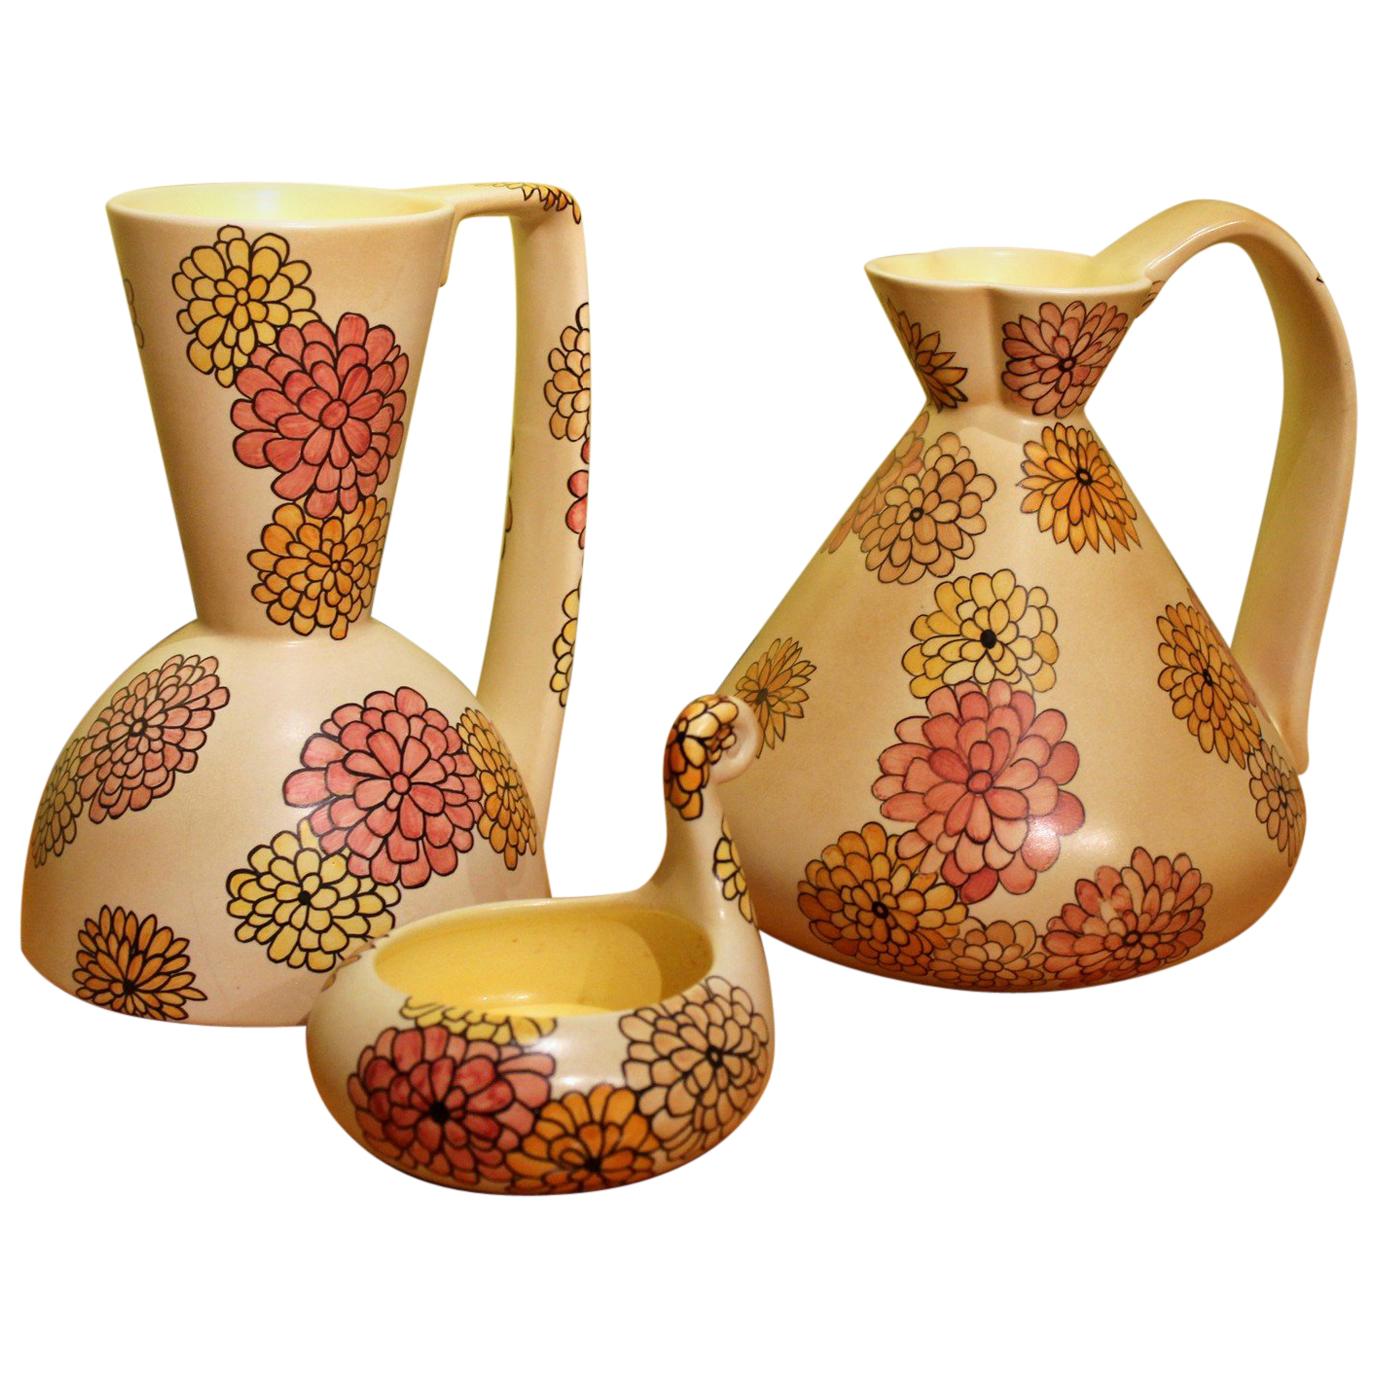 Lenci Italian Art Deco Ceramic Jug, Pitcher and Tray Set with Floral Patterns For Sale